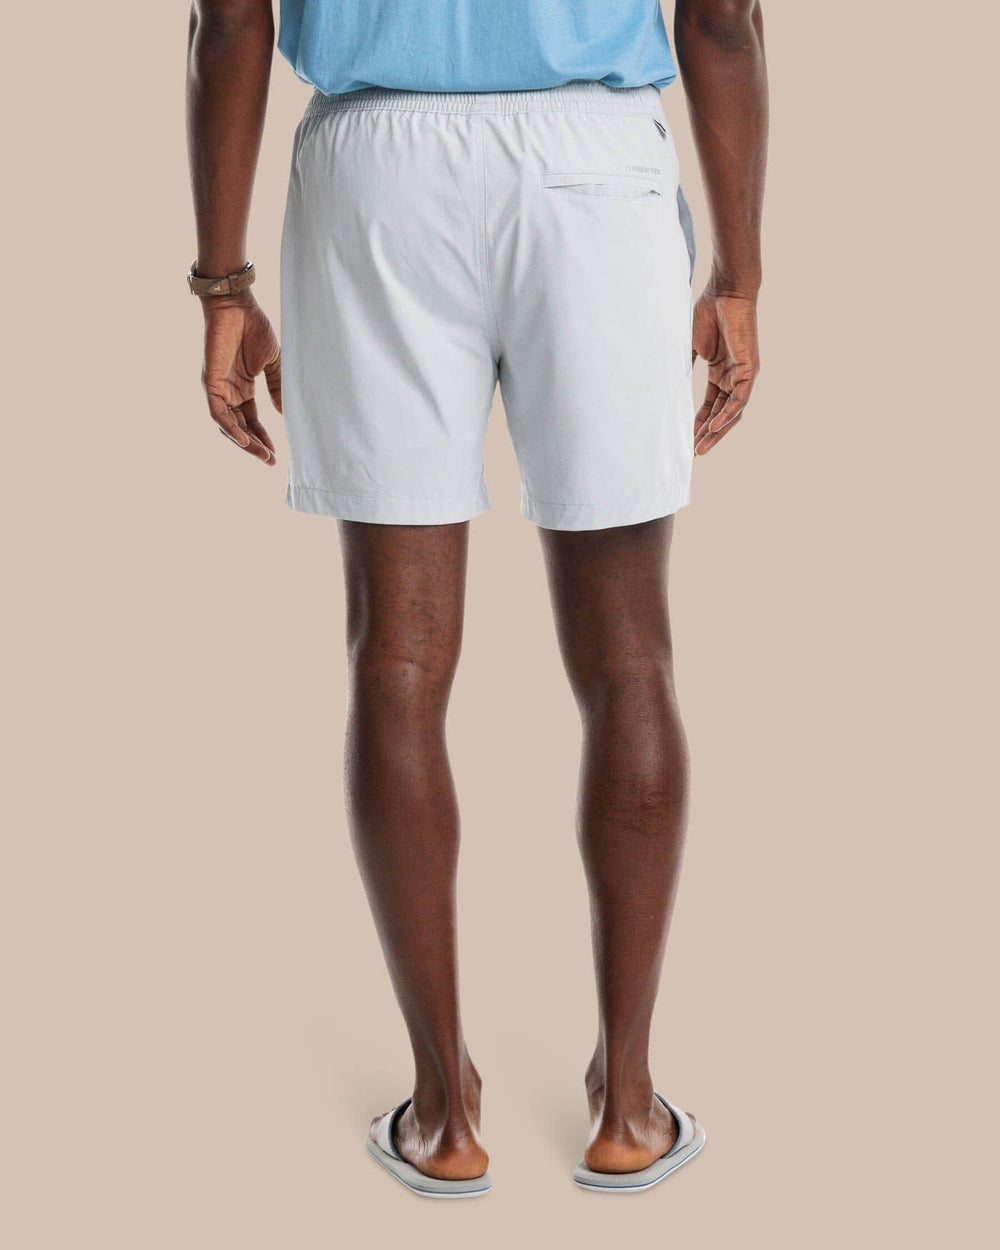 The model back view of the Men's Rip Channel 6 Inch Performance Short by Southern Tide - Seagull Grey